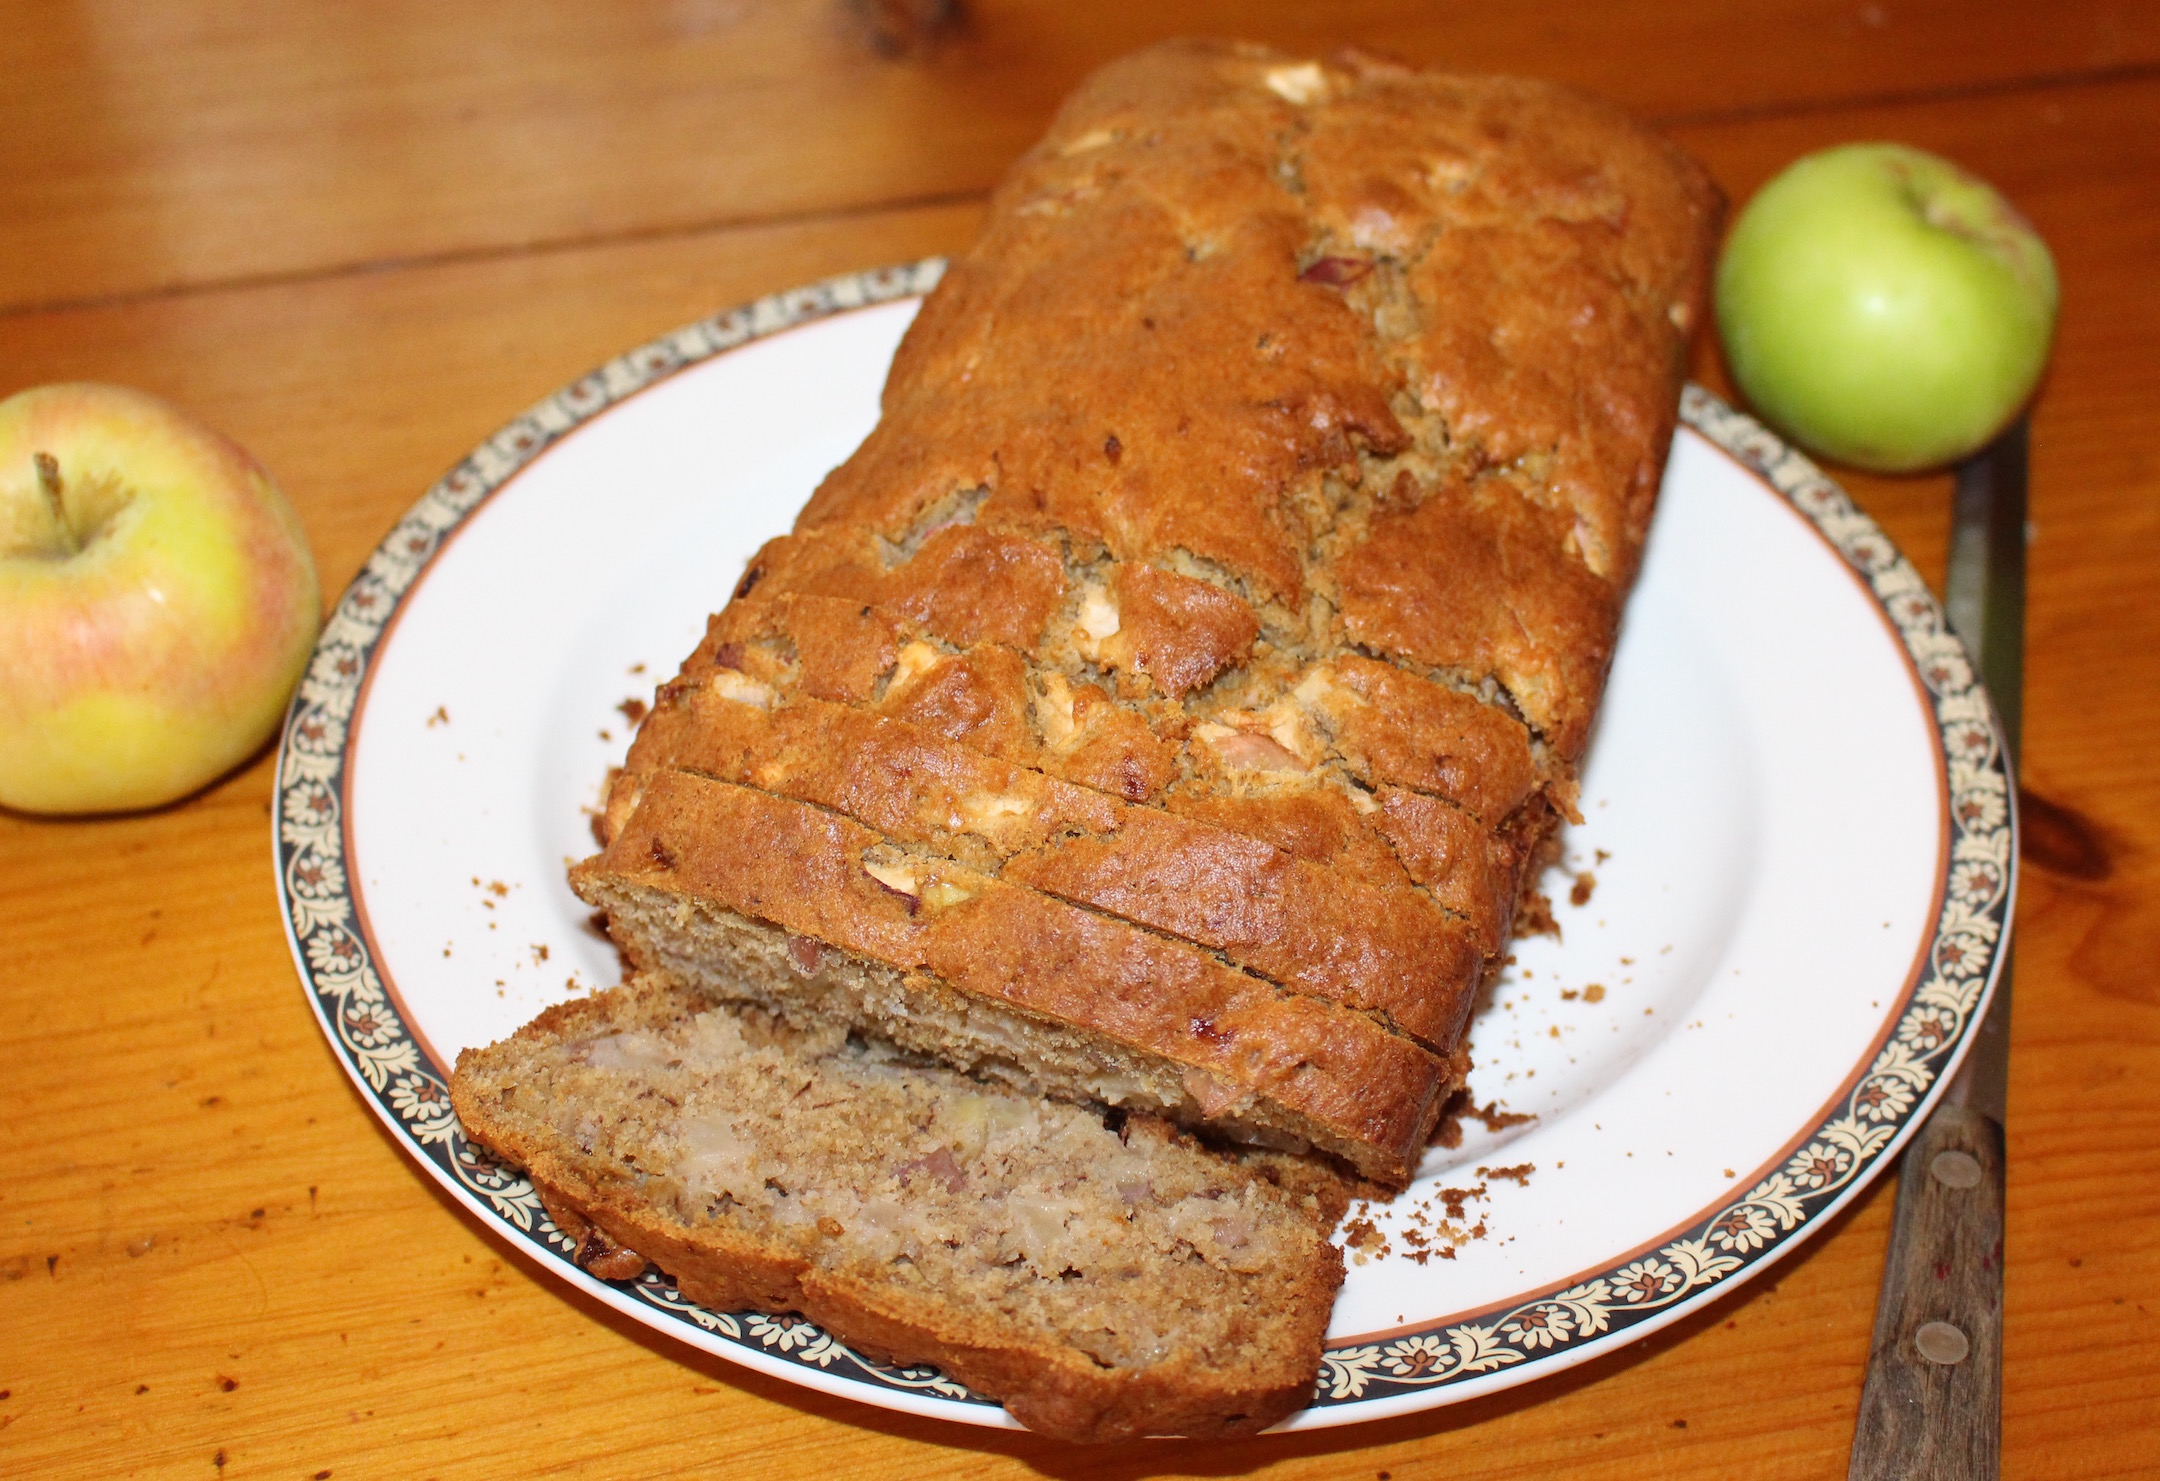 10 things to know about McIntosh, and Apple Banana Bread recipe - New